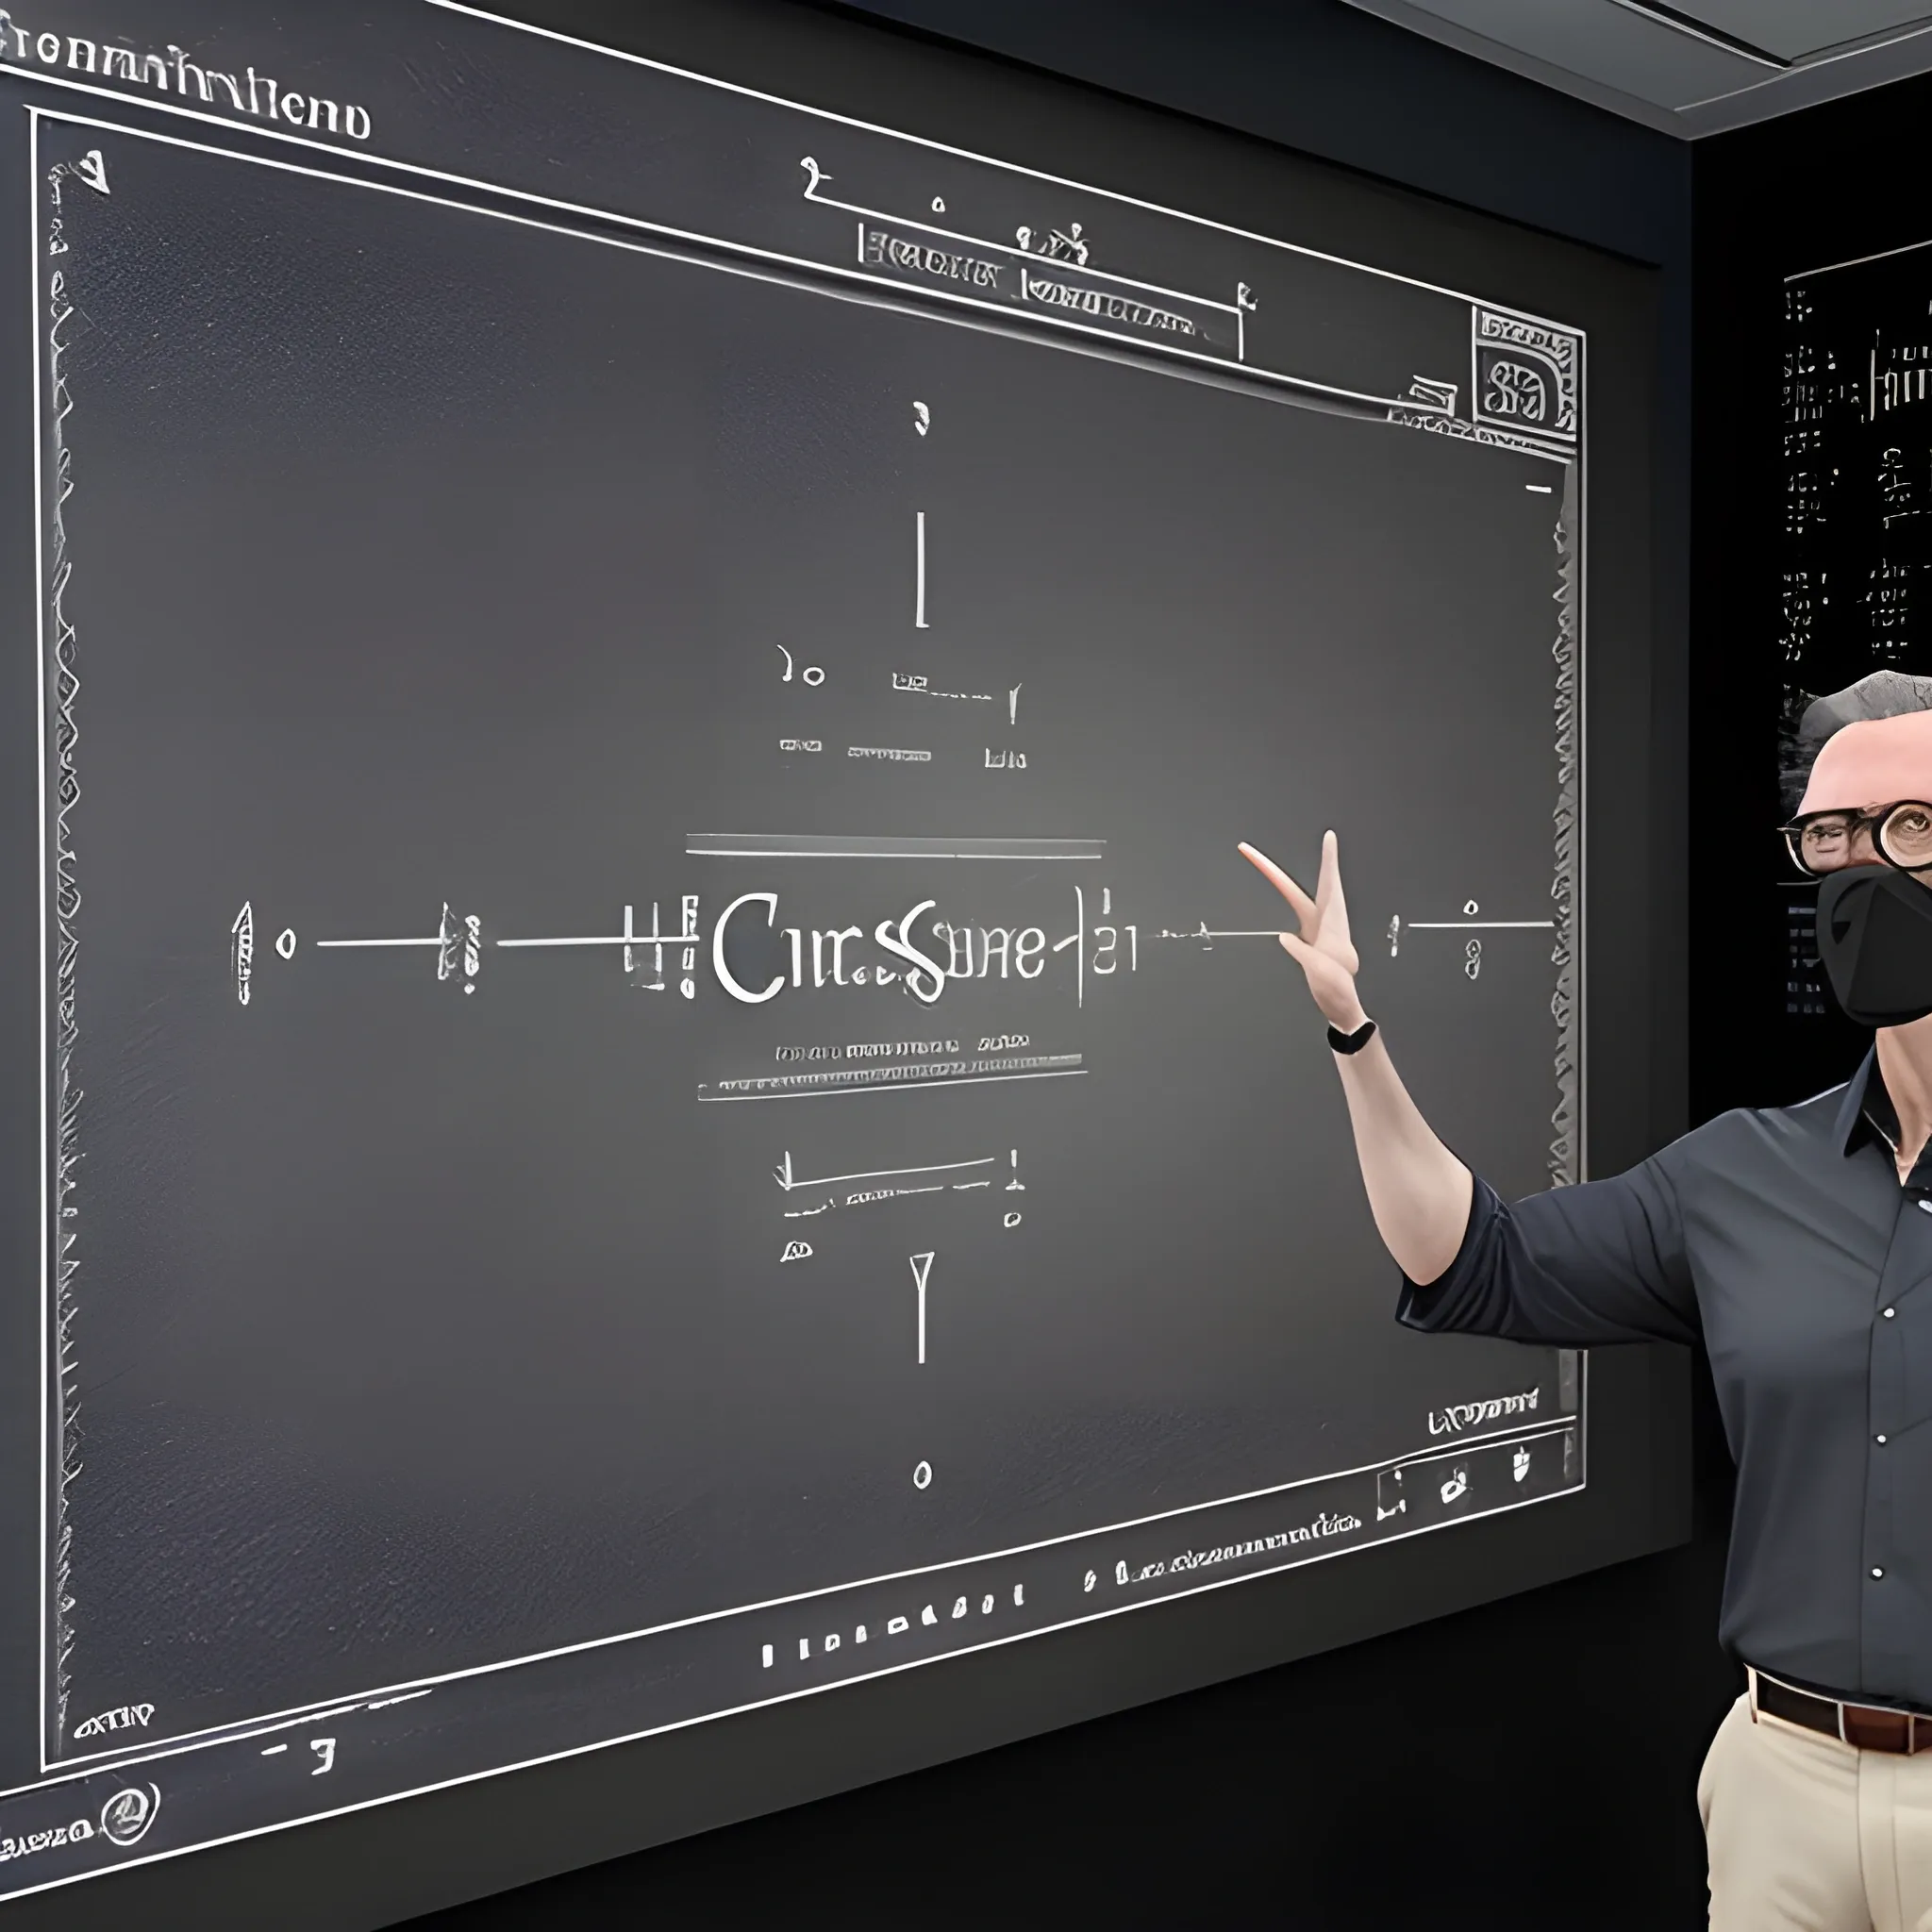 It generates a hyper-realistic image of a classic university classroom with a blackboard in the background, covered with mathematical equations and flowcharts representing artificial intelligence algorithms. In front of the blackboard, a silhouette of a professor in a teaching pose, with one arm raised as if explaining a concept. The professor is a fusion between a human and a cyborg.